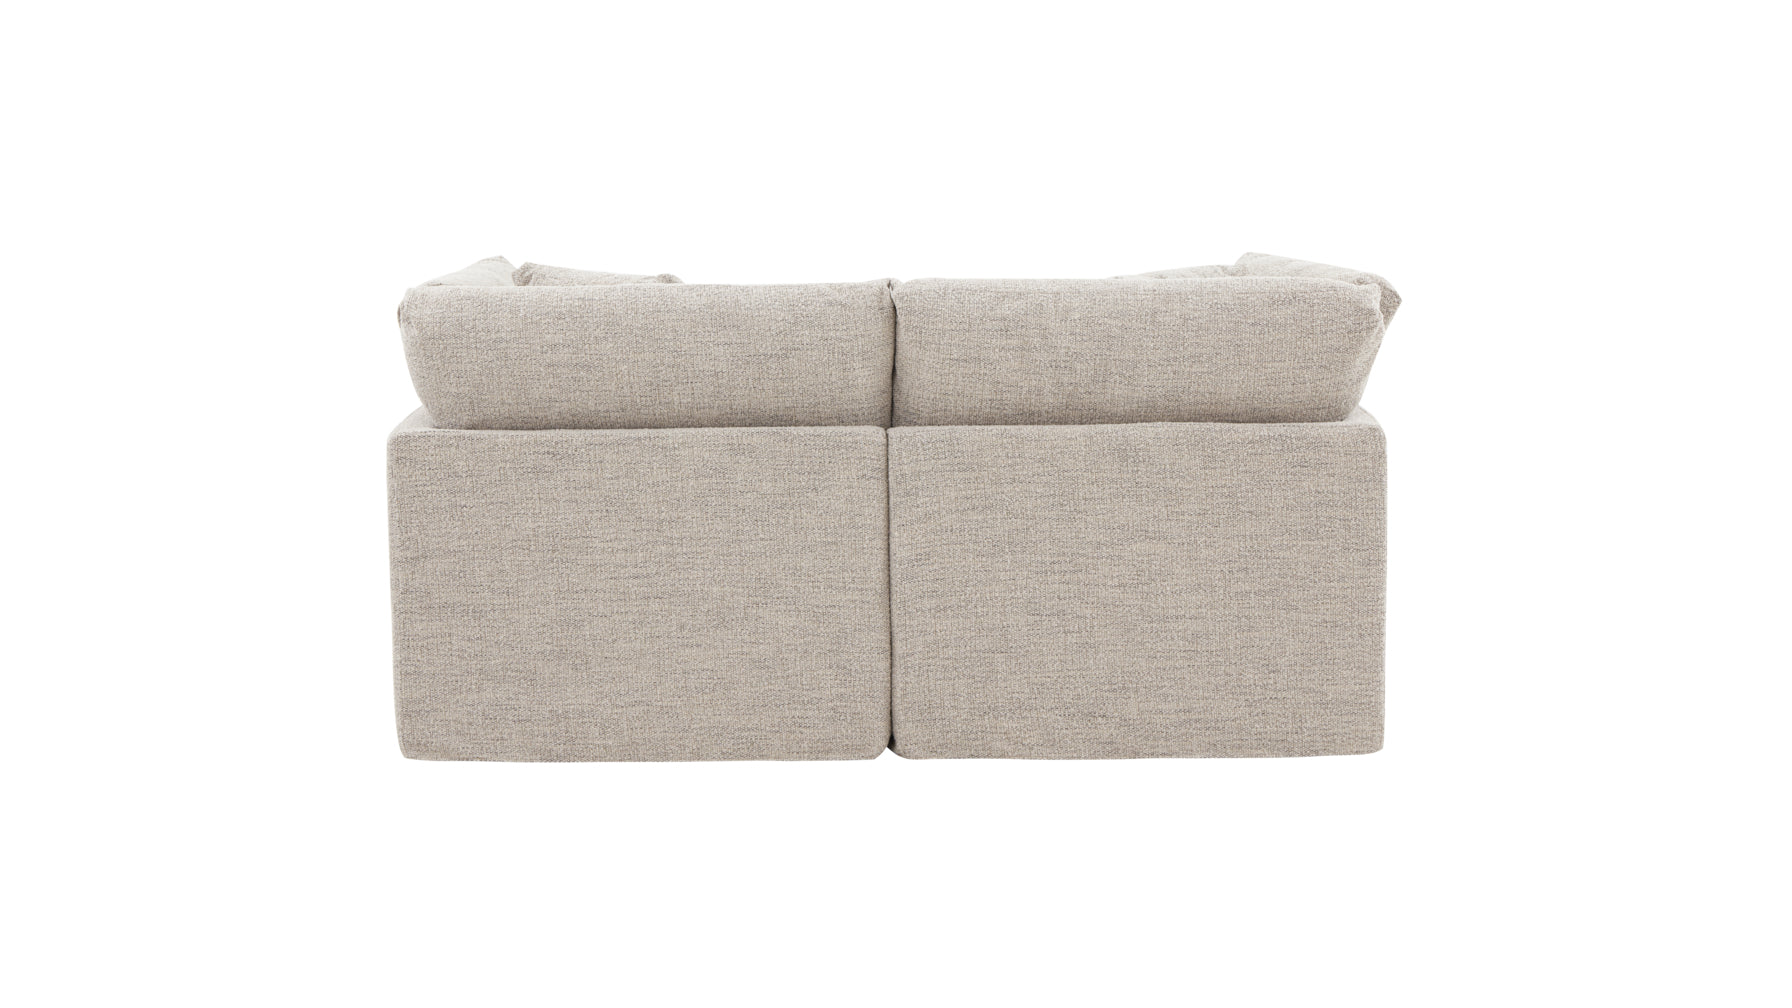 Get Together™ 3-Piece Modular Sectional, Standard, Oatmeal - Image 7